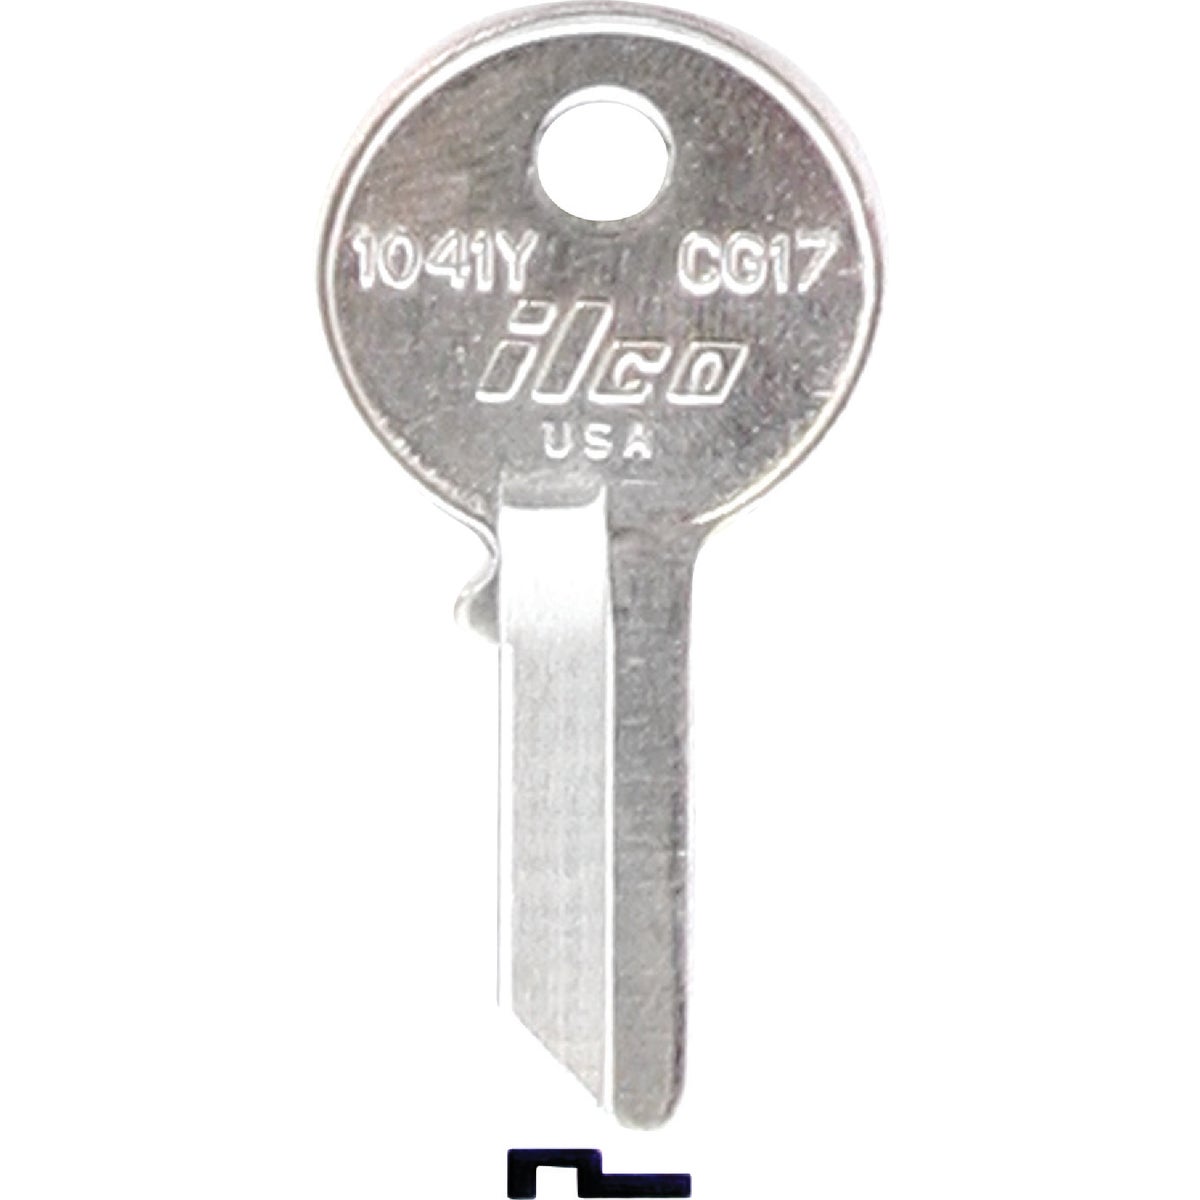 Item 204807, Nickel-plated key blank. When you order one, you will receive 10 keys.